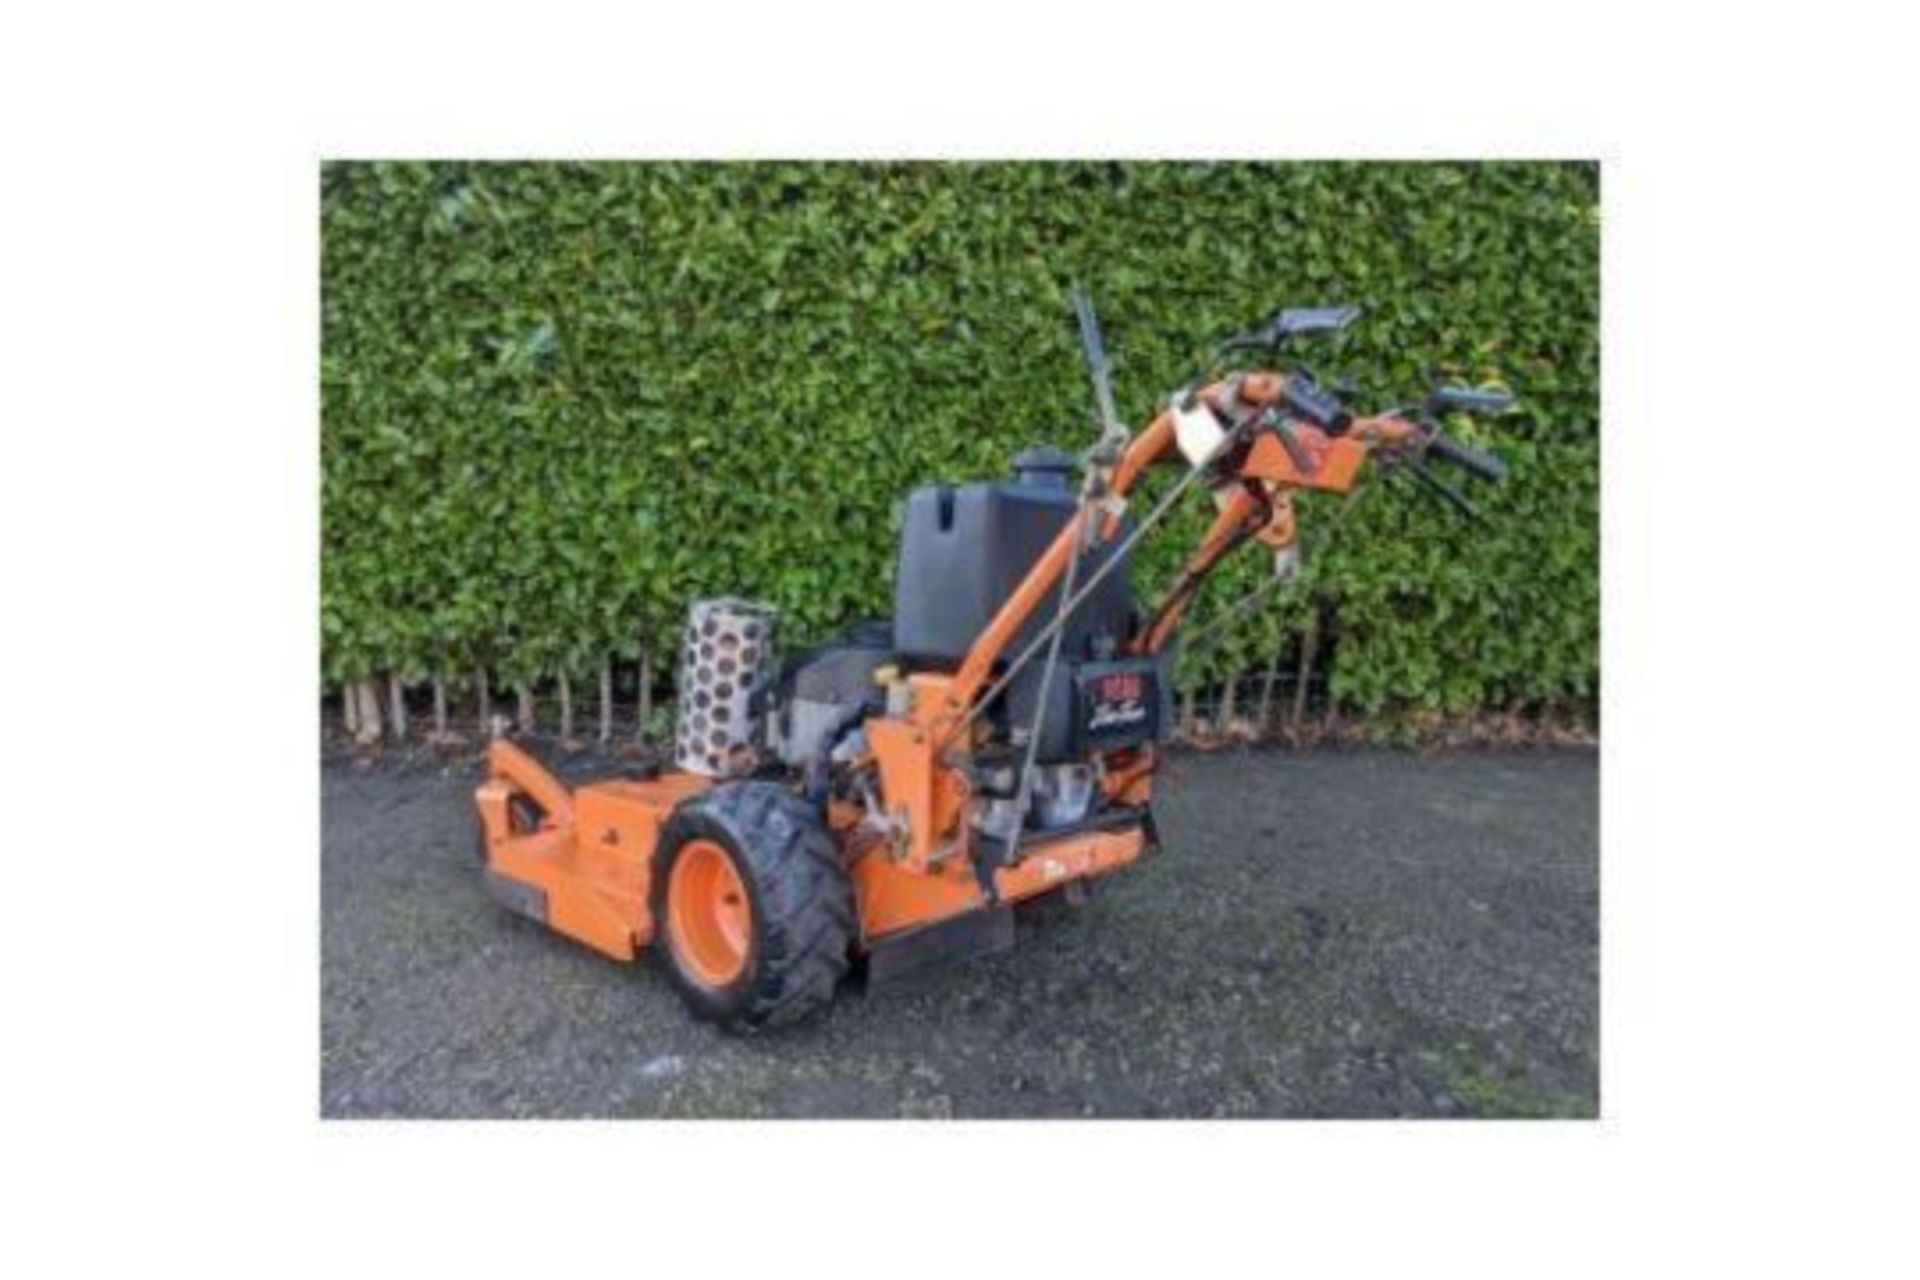 2012 Scag SWZ36A-481FS 36" Commercial Walk Behind Zero Turn Rotary Mower - Image 5 of 6